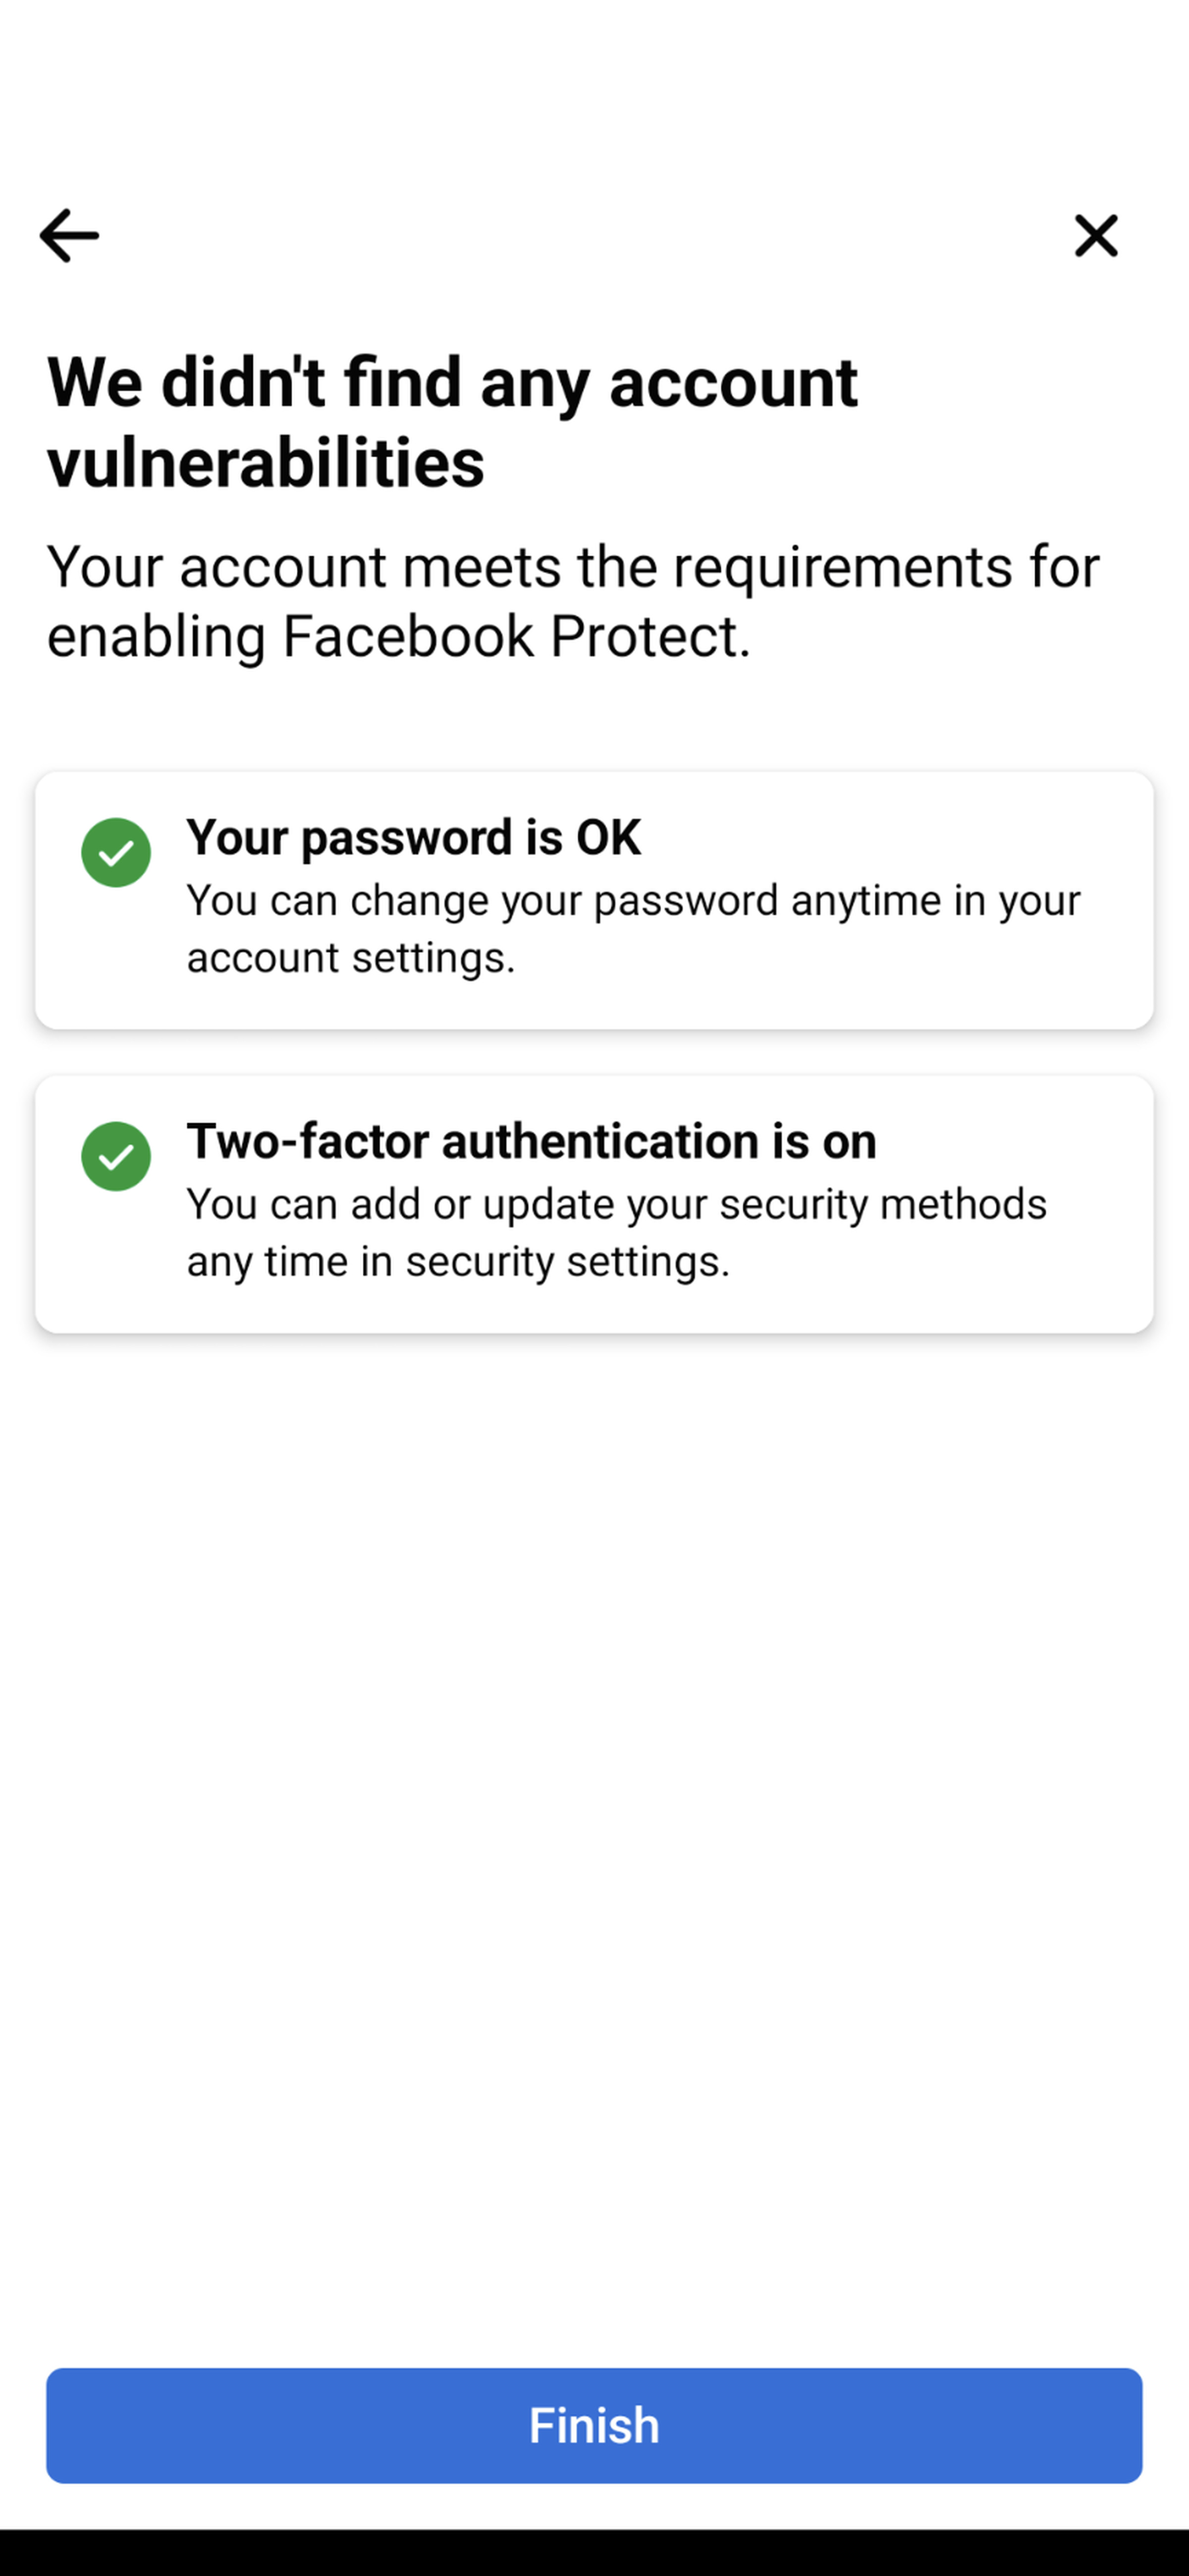 If you’ve already got a decent password and 2FA, you’re done.